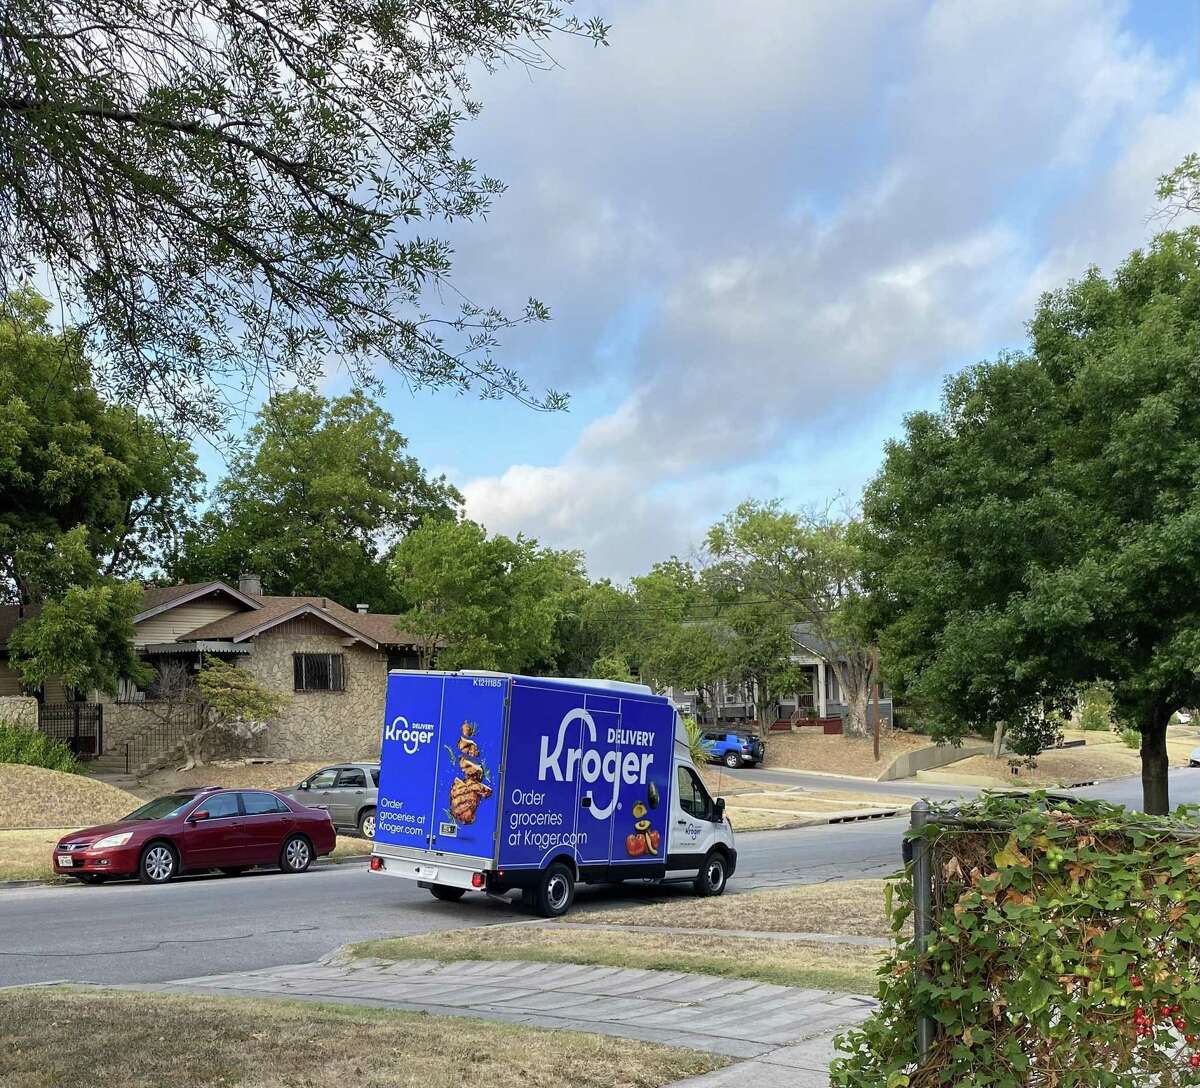 A Kroger delivery truck operating Wednesday in a San Antonio neighborhood.